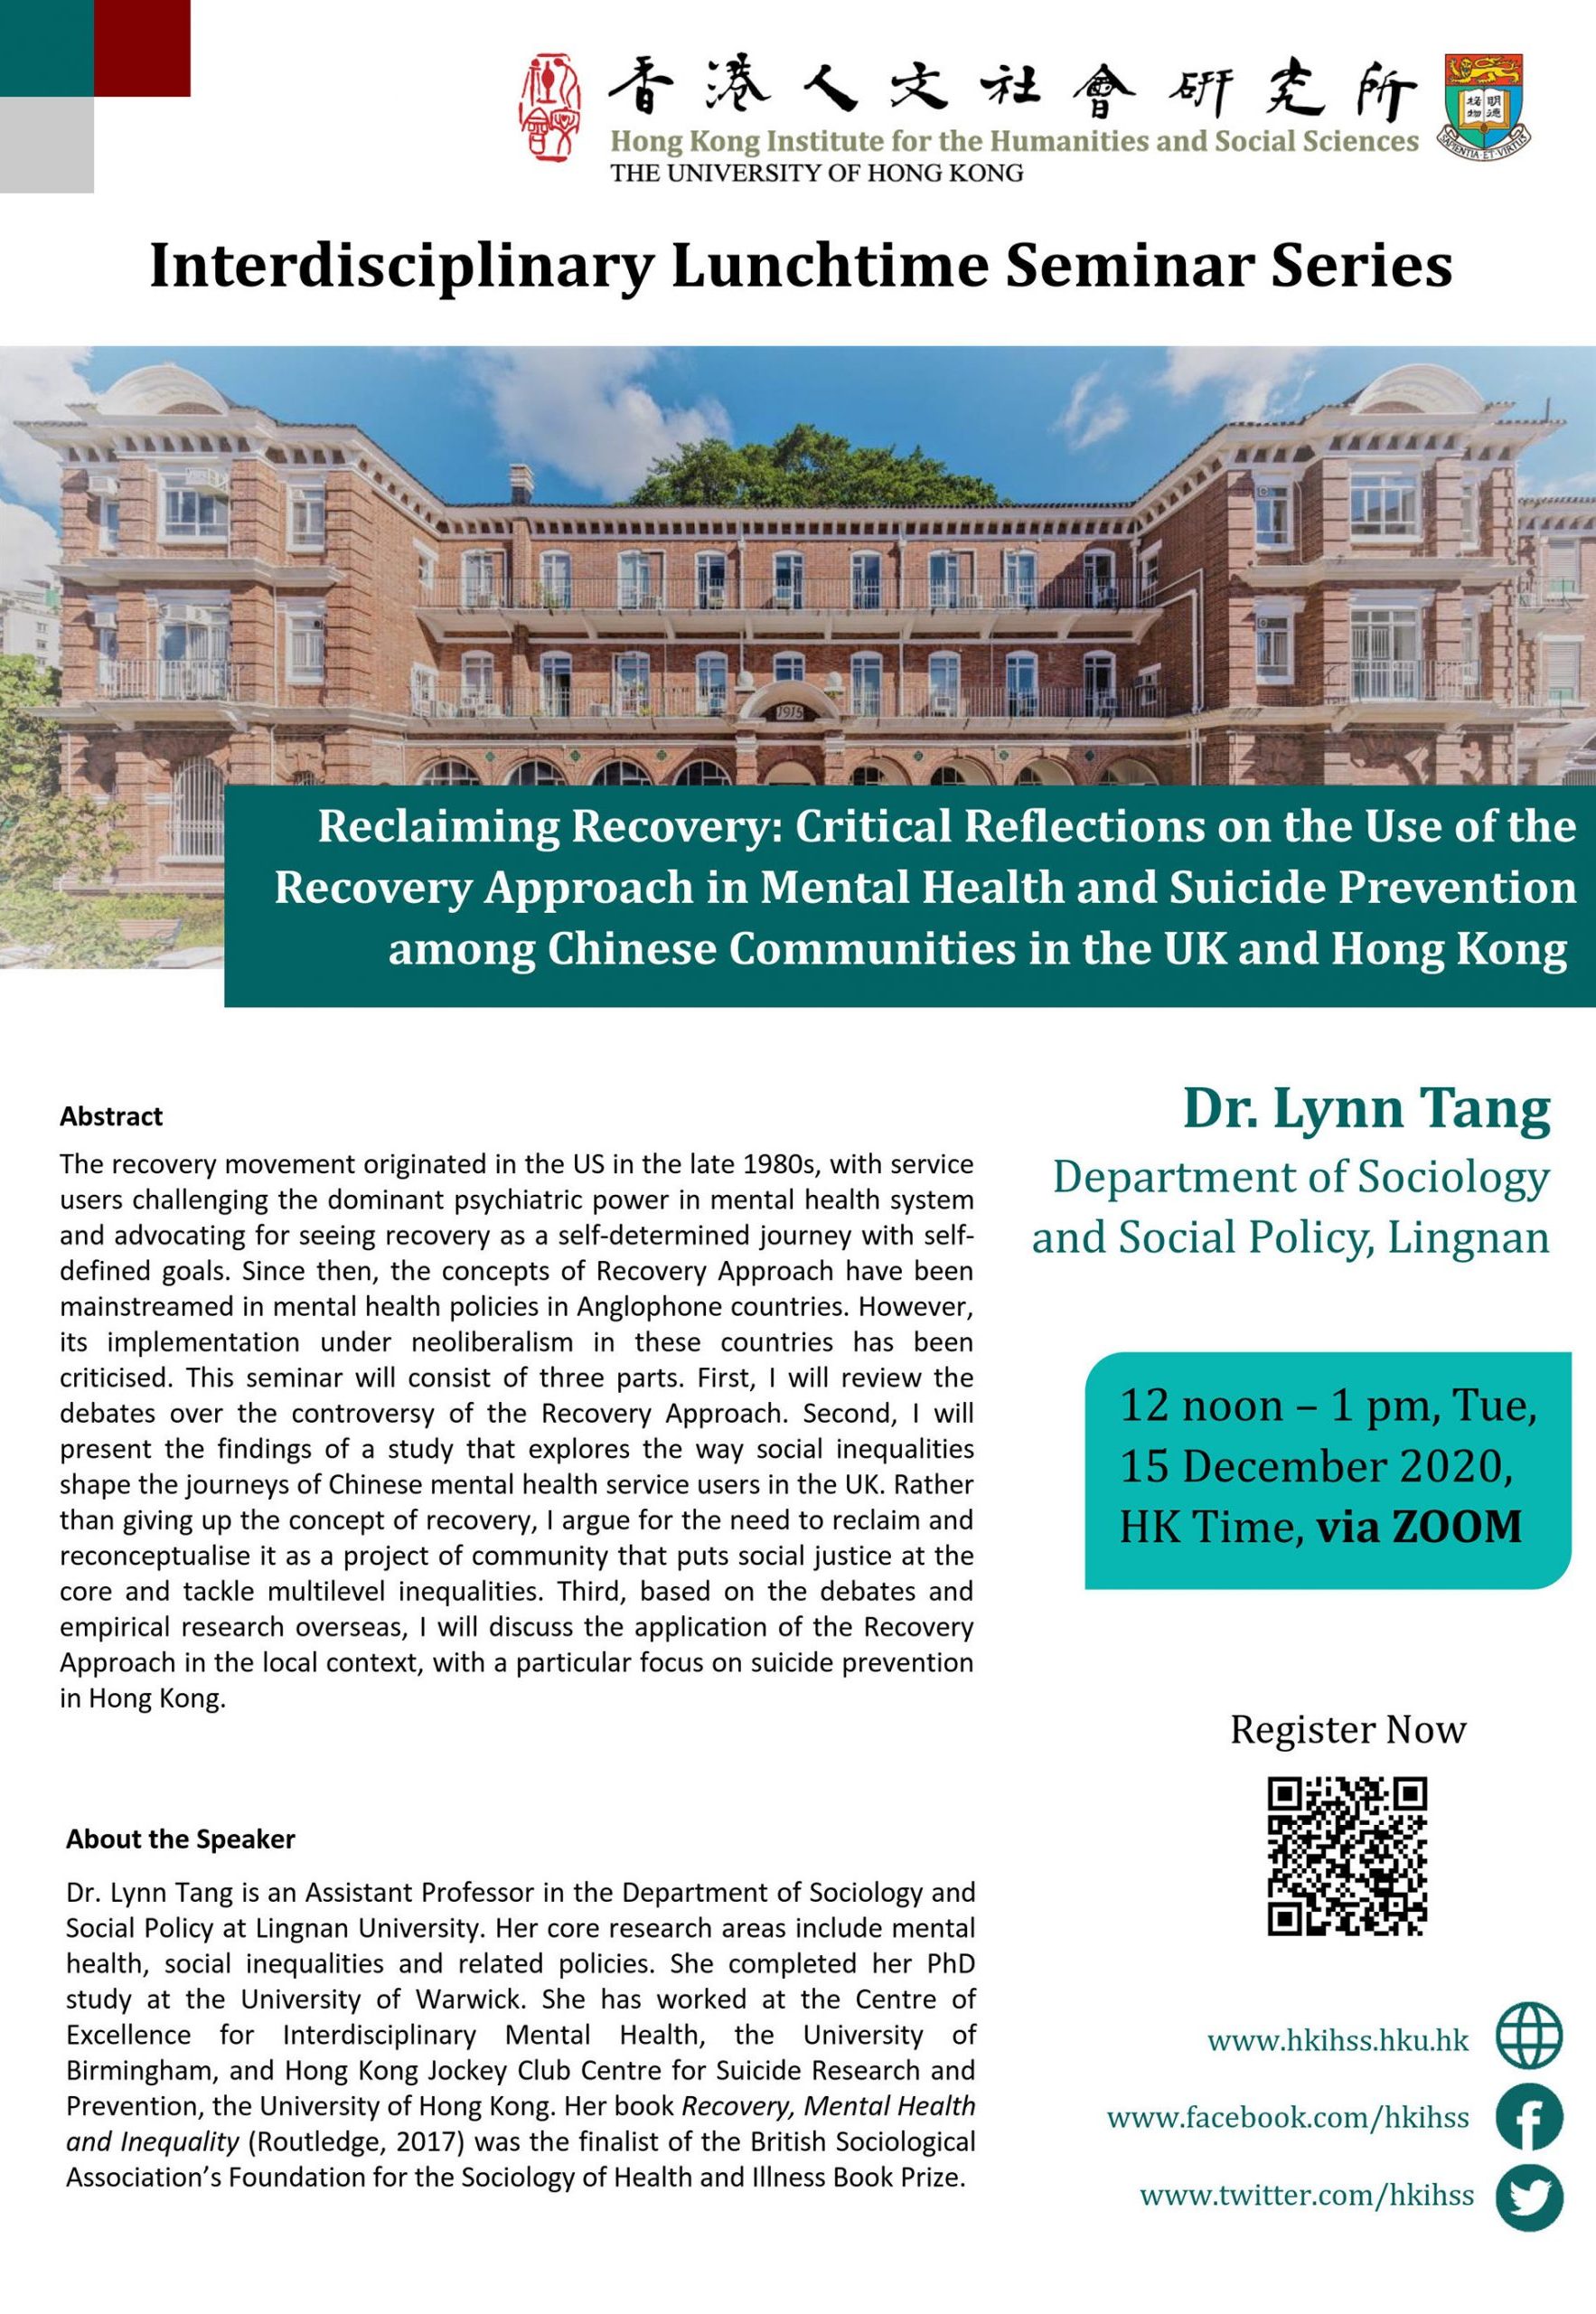 Interdisciplinary Lunchtime Seminar on “Reclaiming Recovery: Critical Reflections on the Use of the Recovery Approach in Mental Health and Suicide Prevention among Chinese Communities in the UK and Hong Kong” by Dr. Lynn Tang (December 15, 2020)